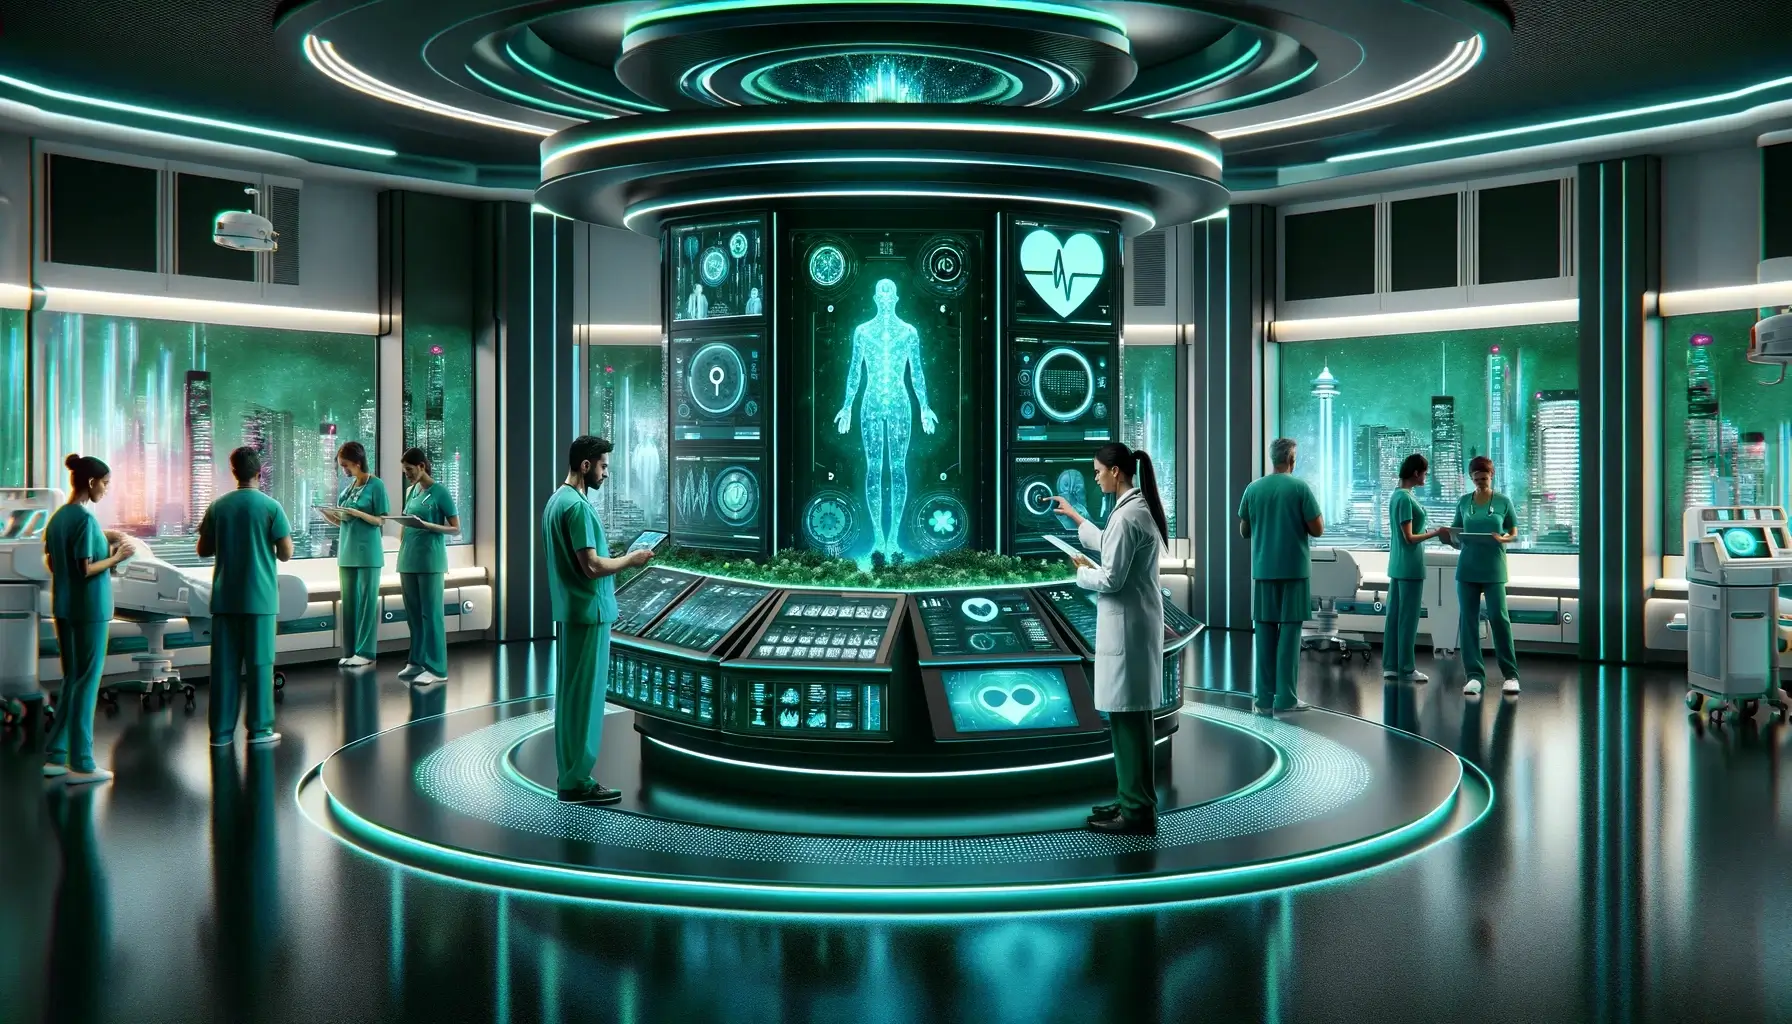 Futuristic medical room with people discussing AI ethical issues and inductive bias in machine learning